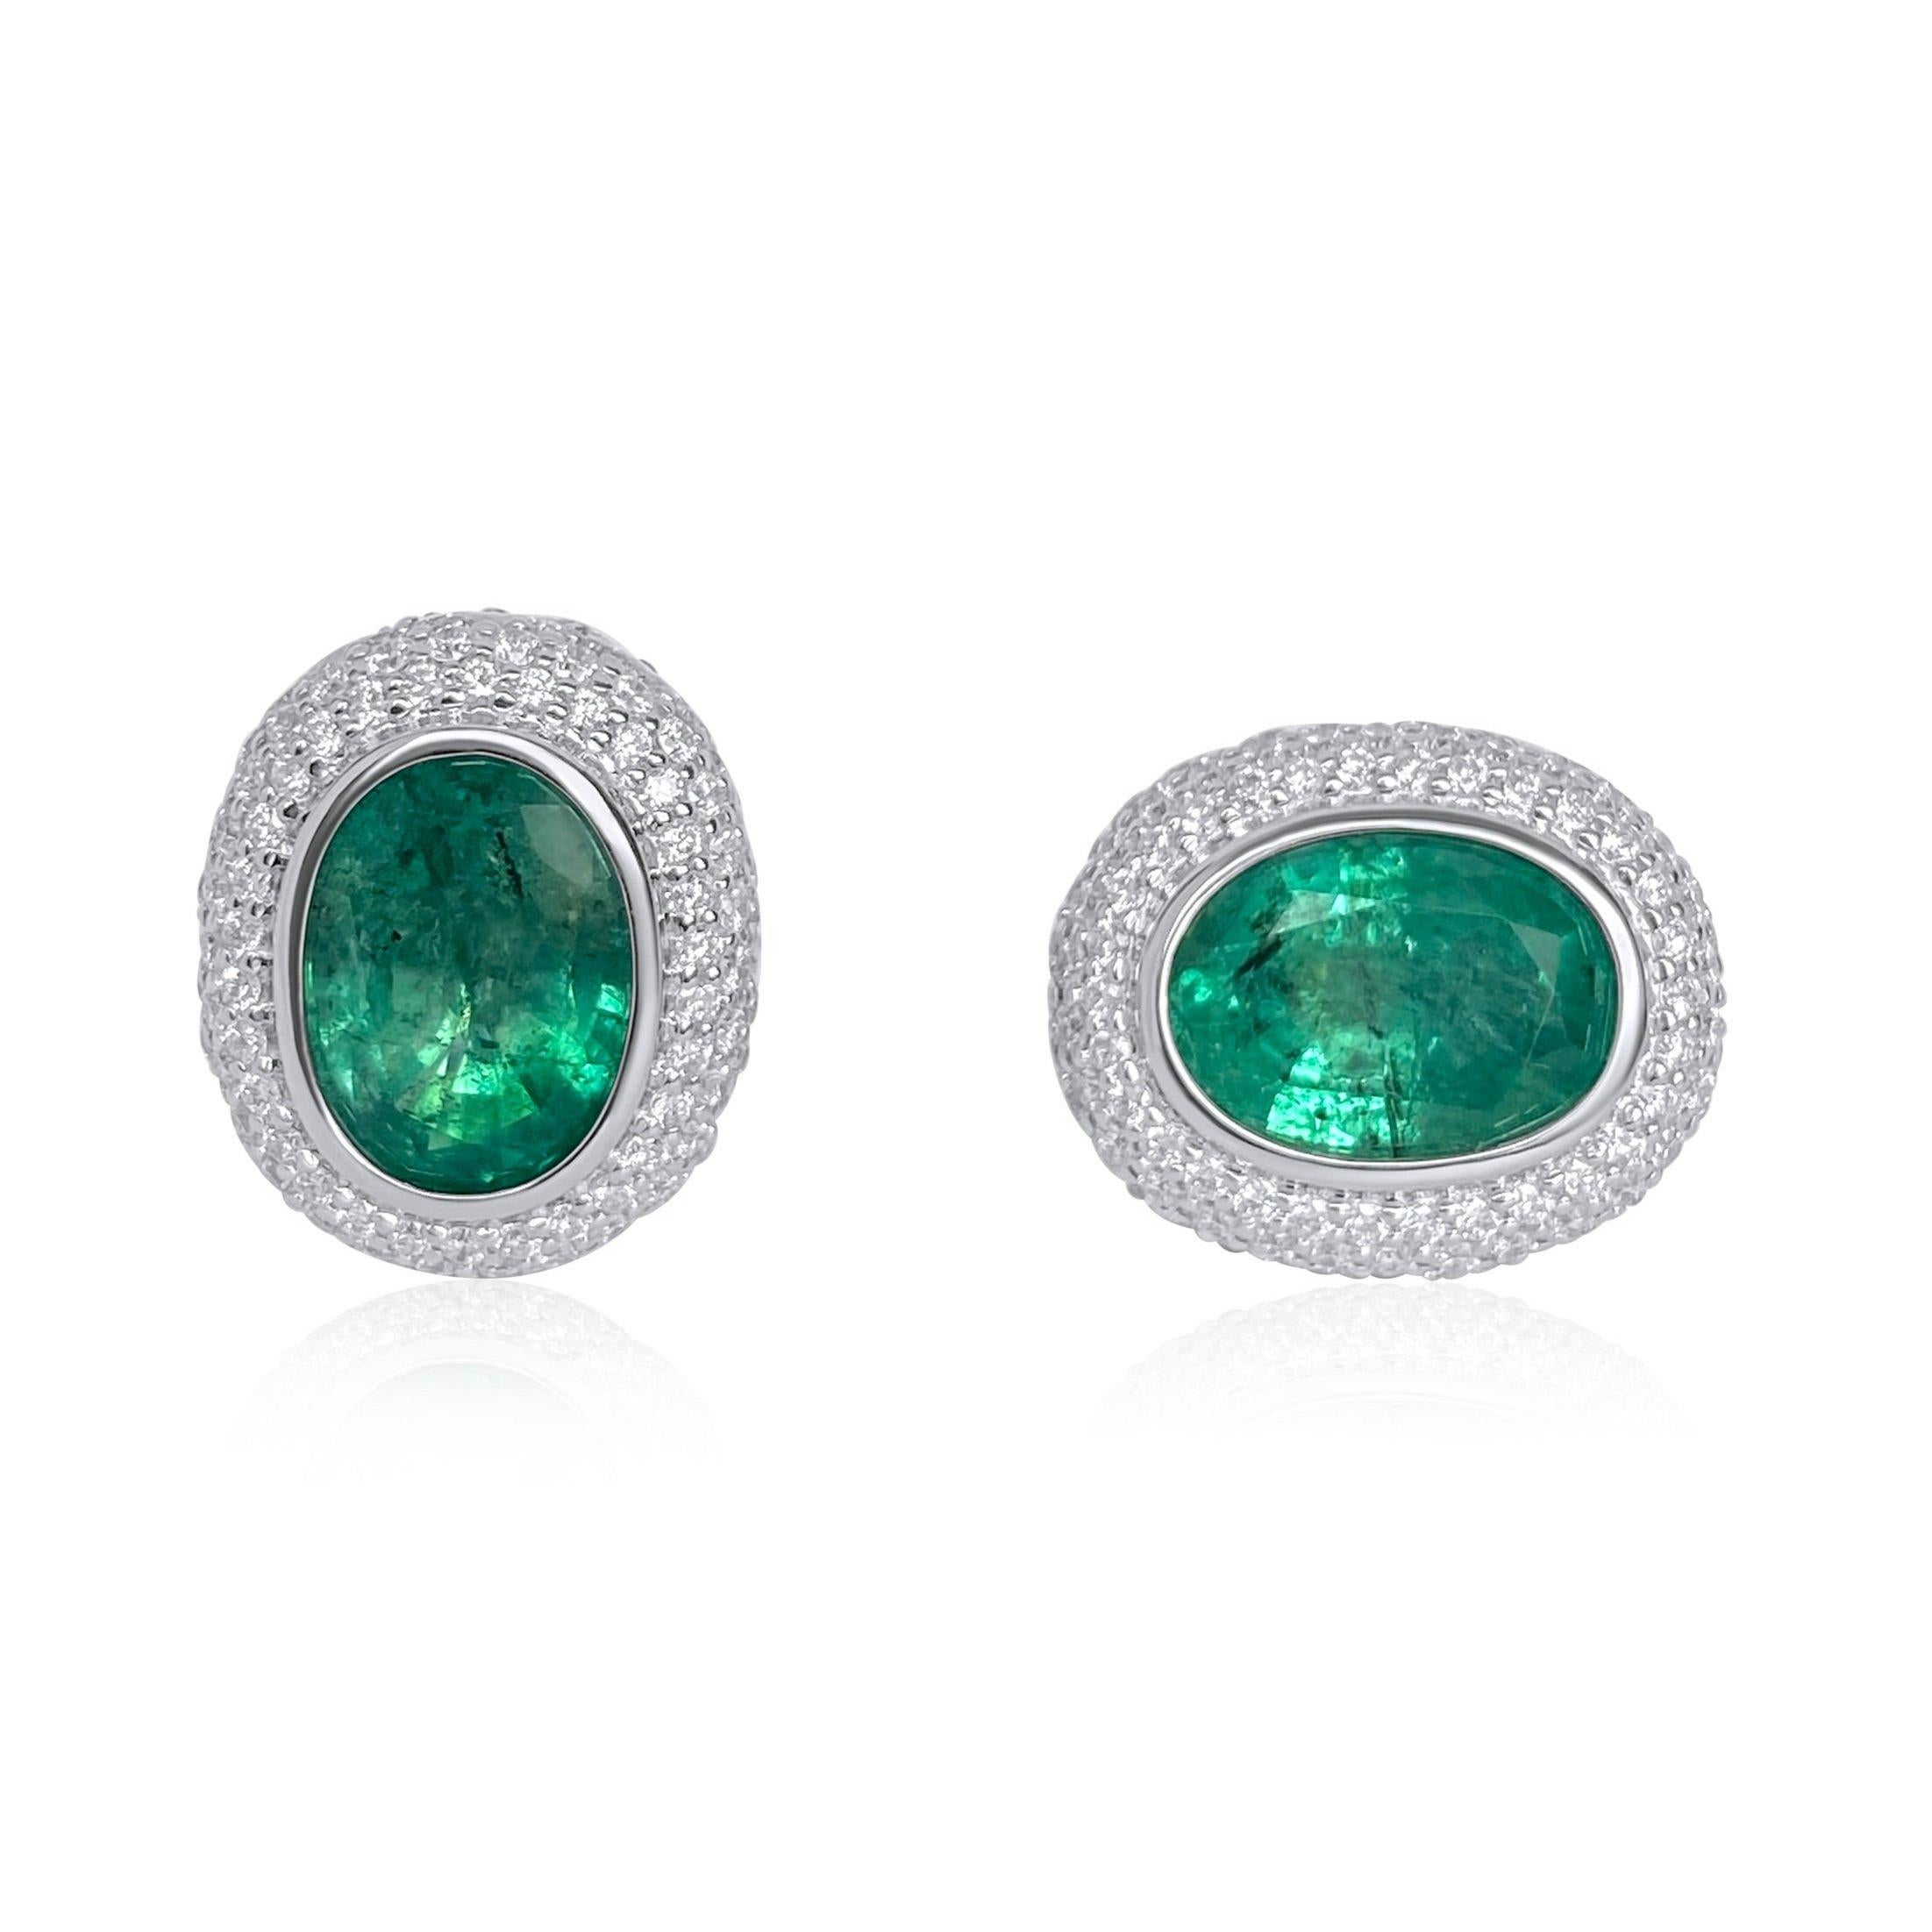 Almost 5 ctw Emerald Ovals set in RiNoor’s iconic Lotus motif setting. Part of RiNoor’s Lotus collection comprising of rings, earrings and bracelets, the Lotus collection is a customer favorite. Explore all the color variations in this collection.